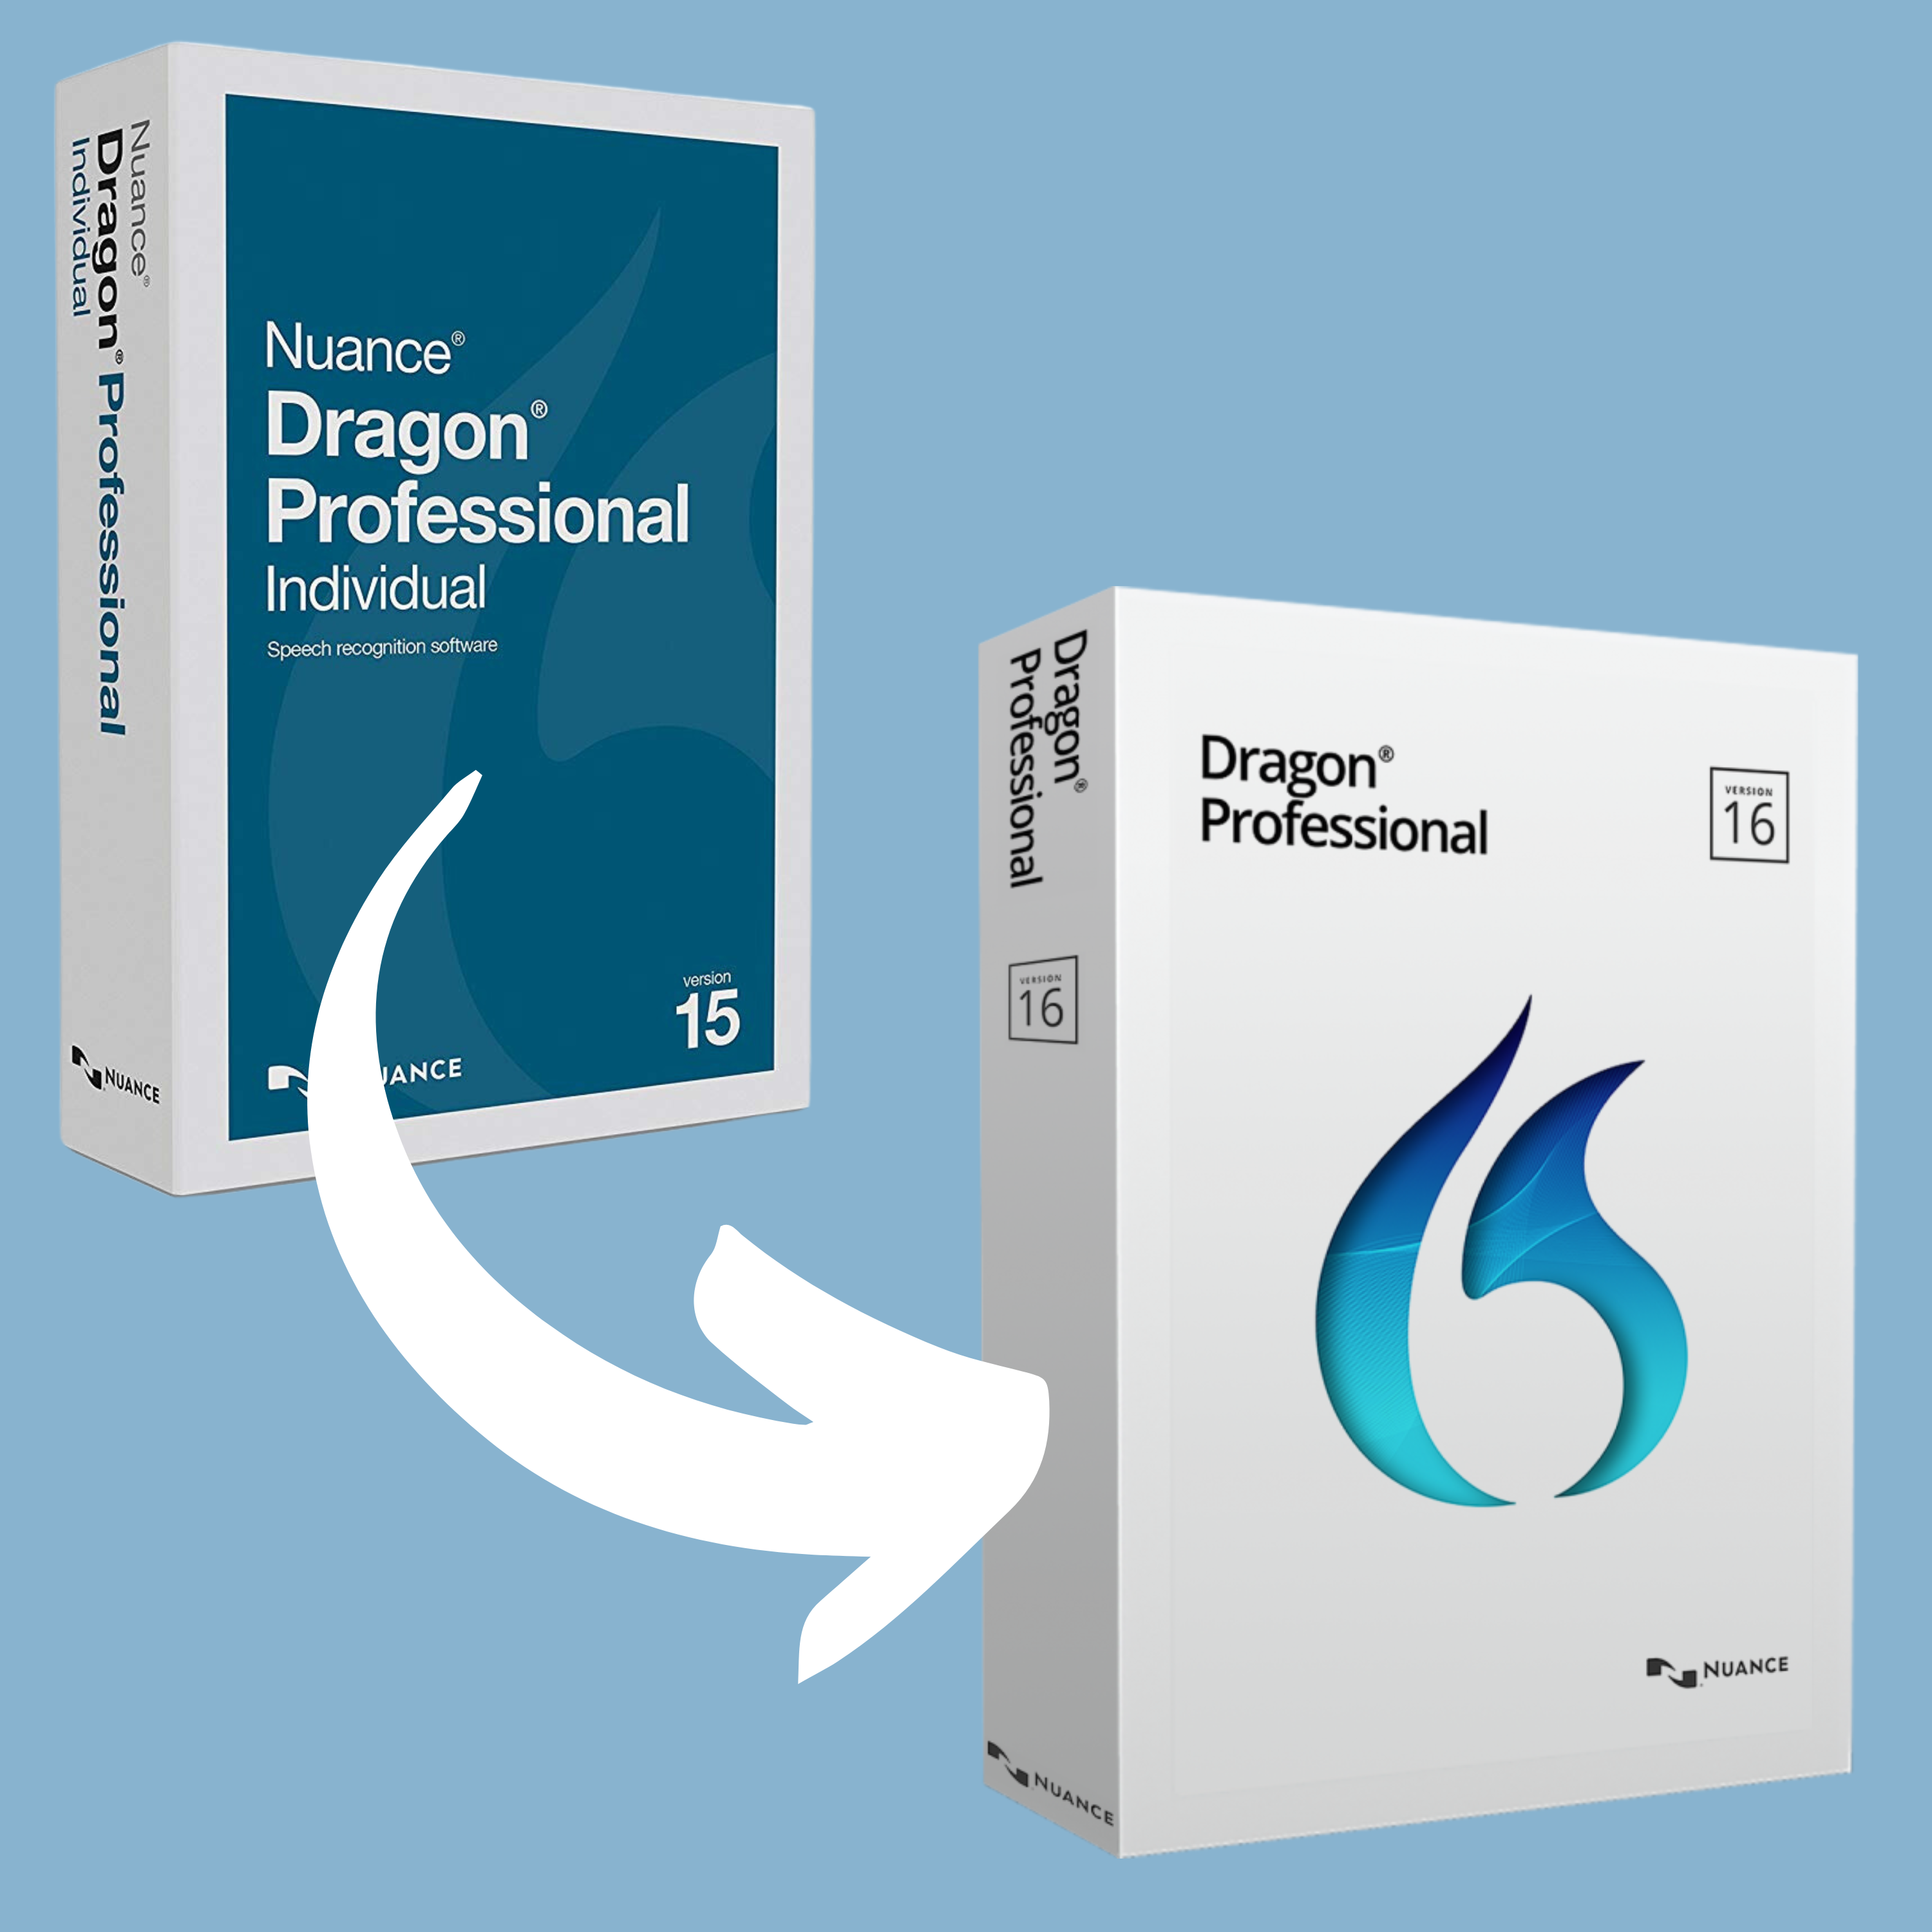 Image of dragon professional individual 15 box with an arrow pointing towards Dragon professional individual 16